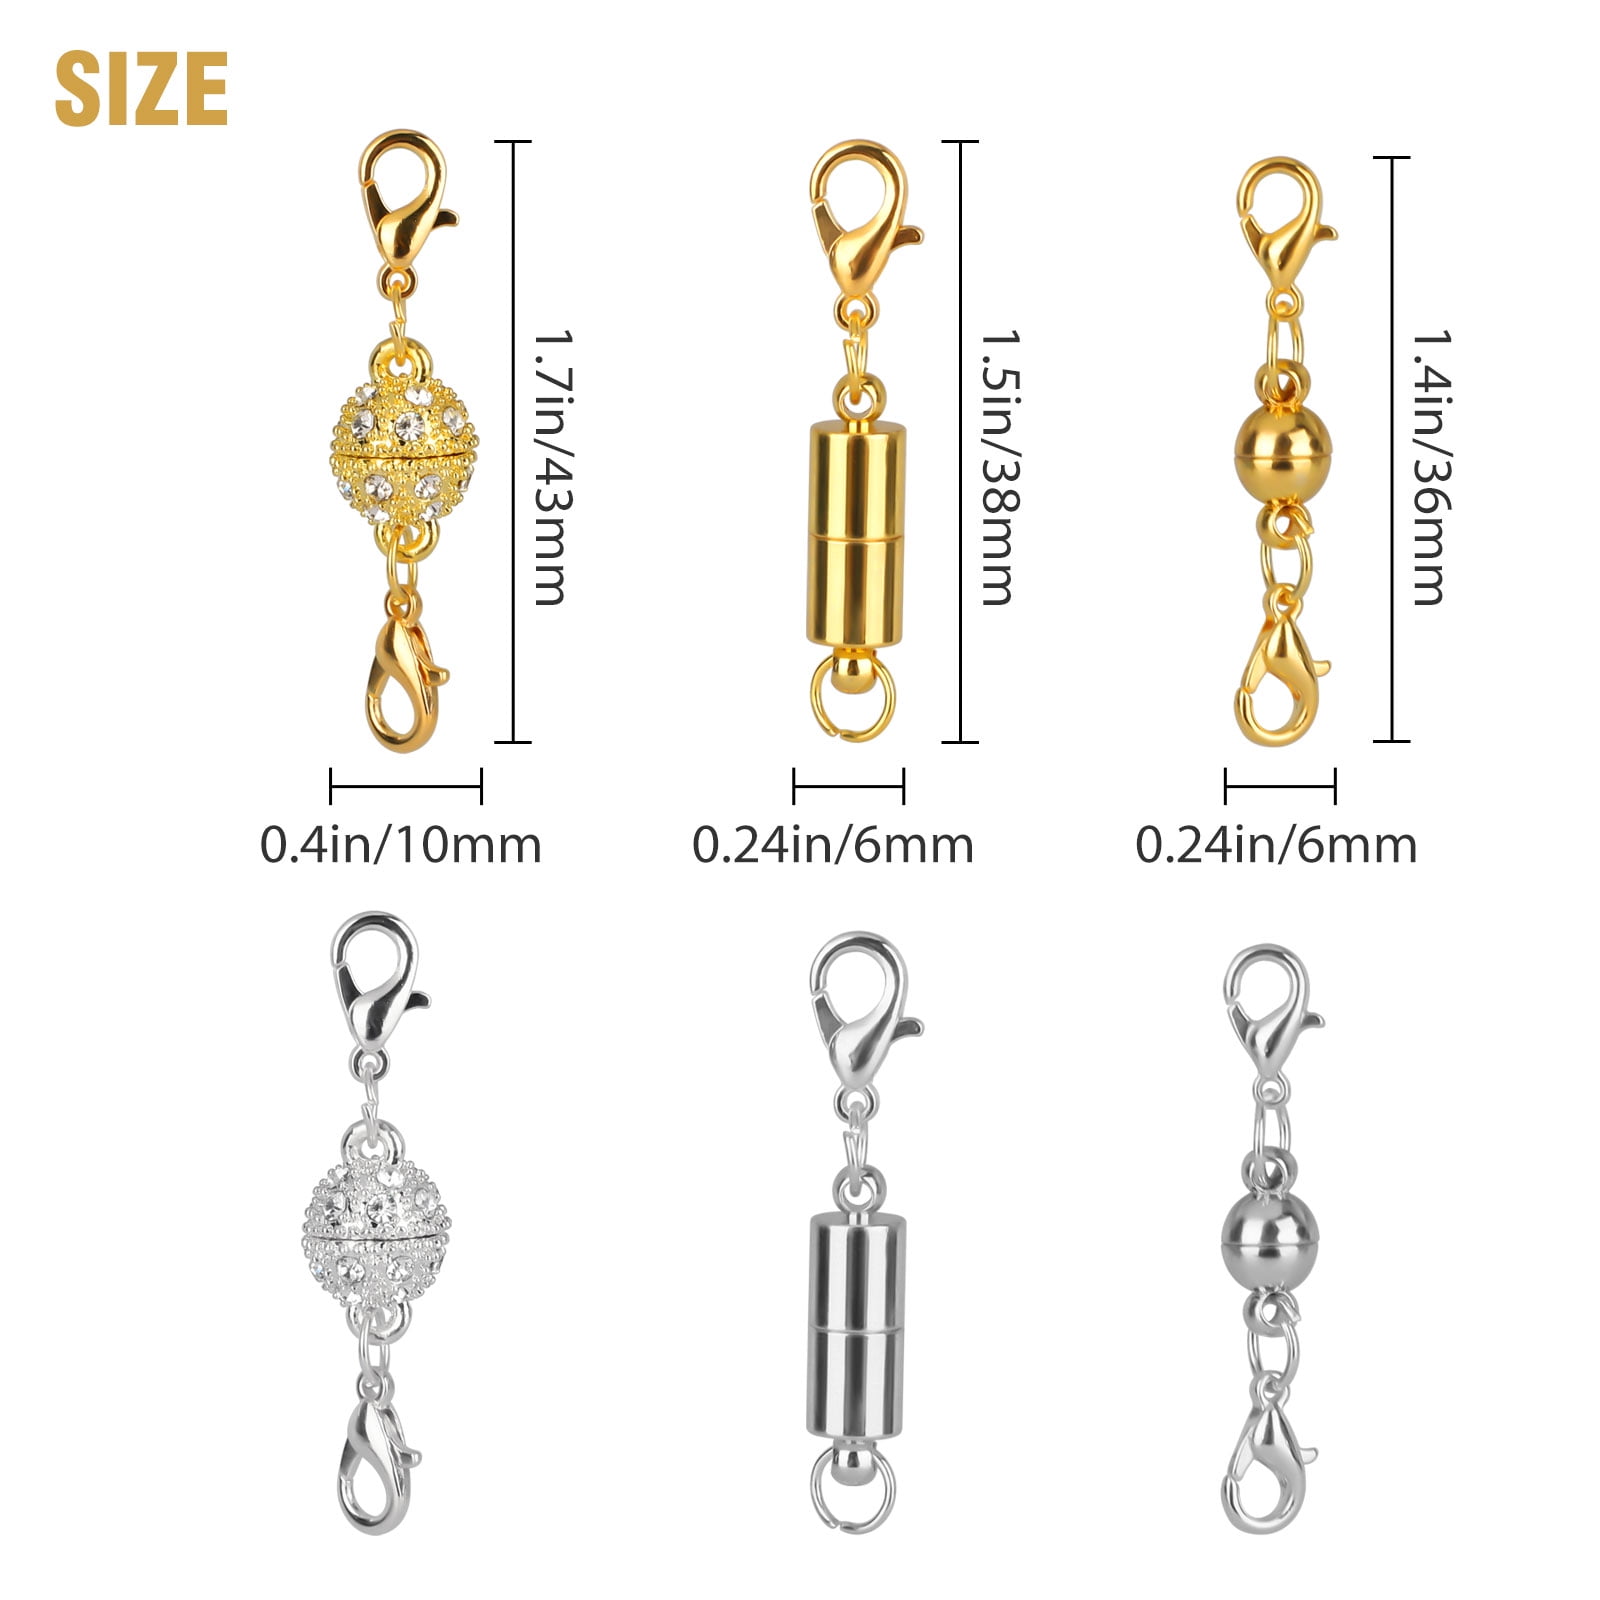 SPARIK ENJOY 14K Magnetic Necklaces Clasp Converter Closures Jewelry Clasps  Connector Chain Extender Locking Magnetic Jewelry Making Supplies for DIY